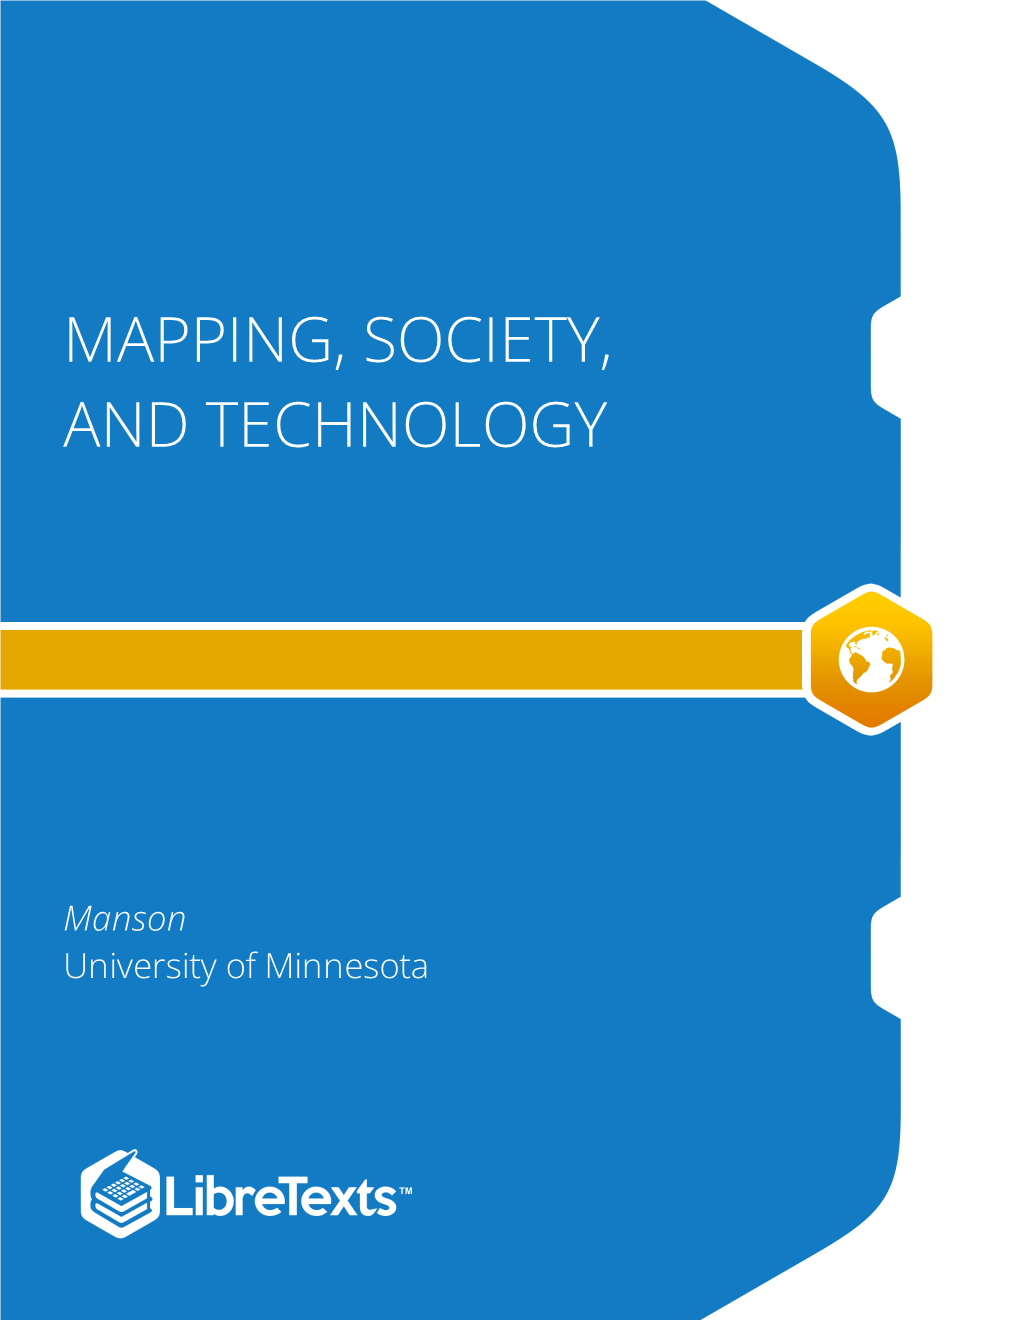 Mapping, Society, and Technology